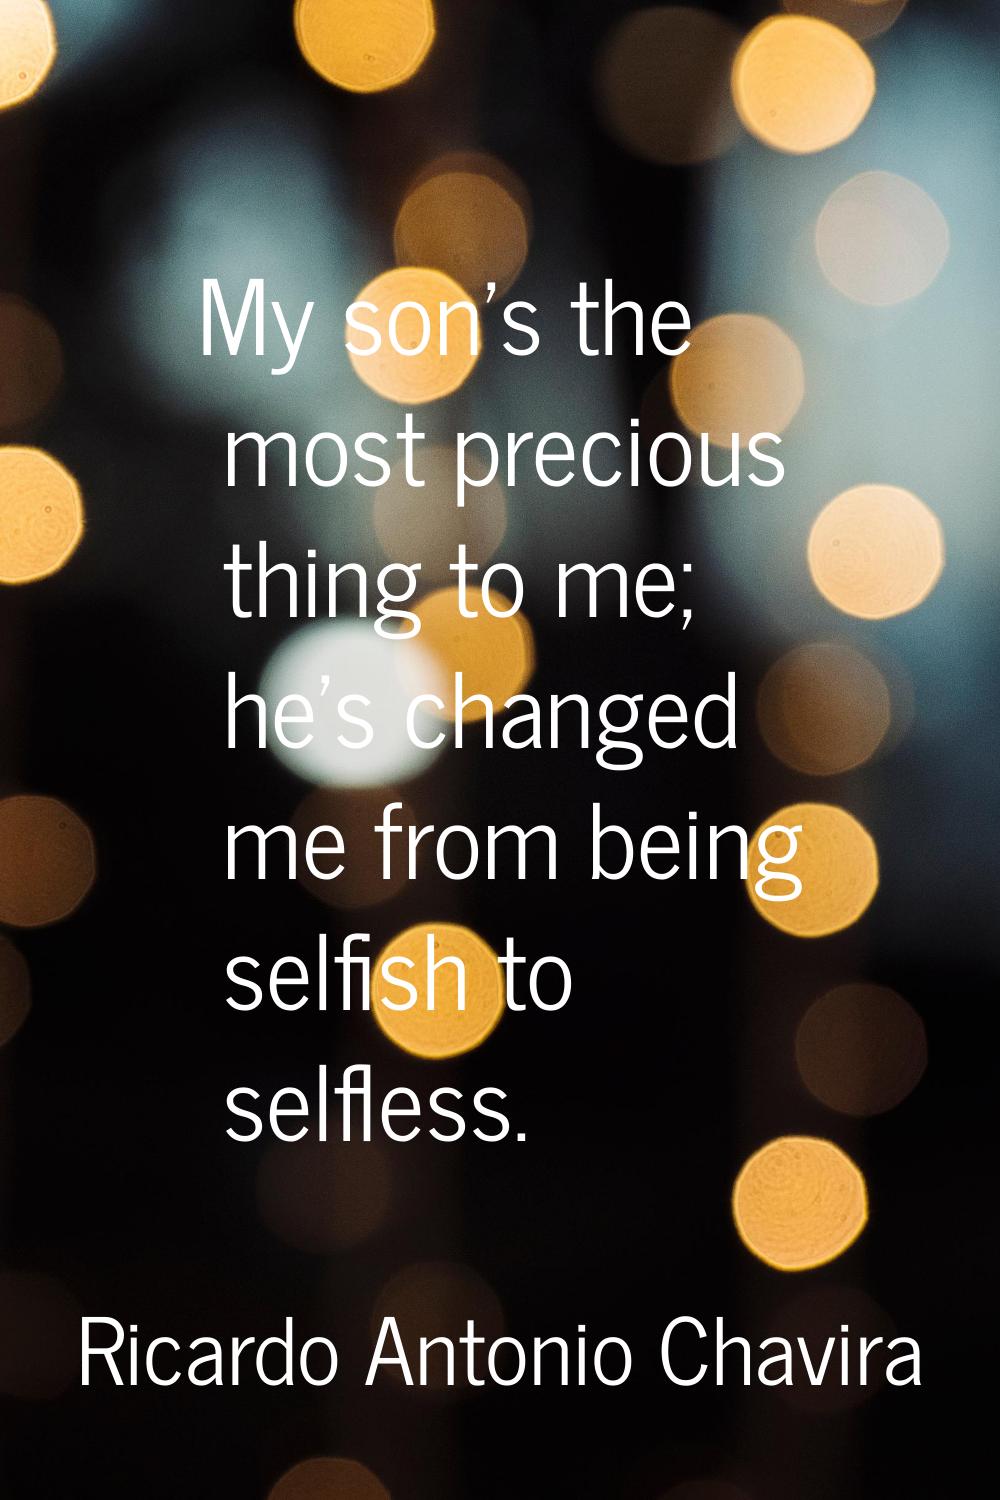 My son's the most precious thing to me; he's changed me from being selfish to selfless.